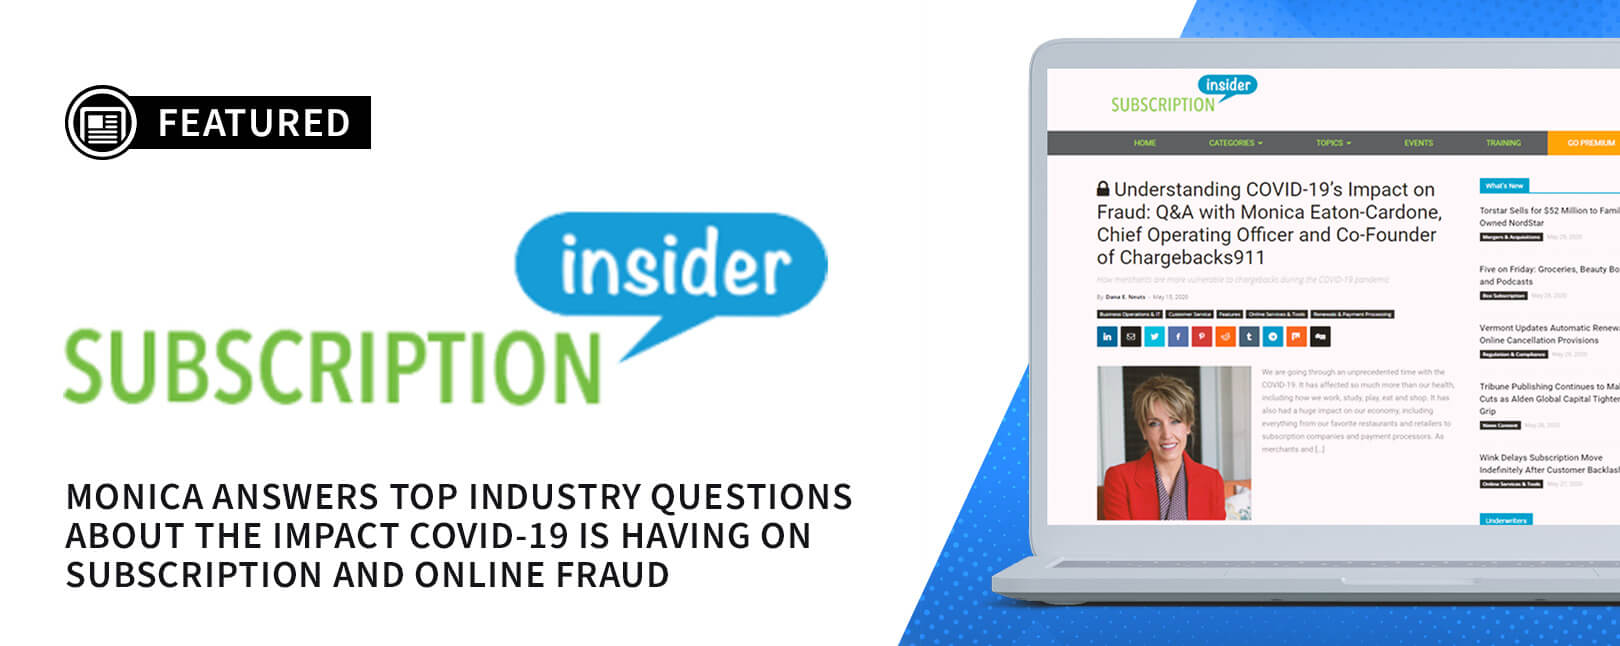 Chargebacks911® COO Hosts Industry Q&A for Subscription Insider